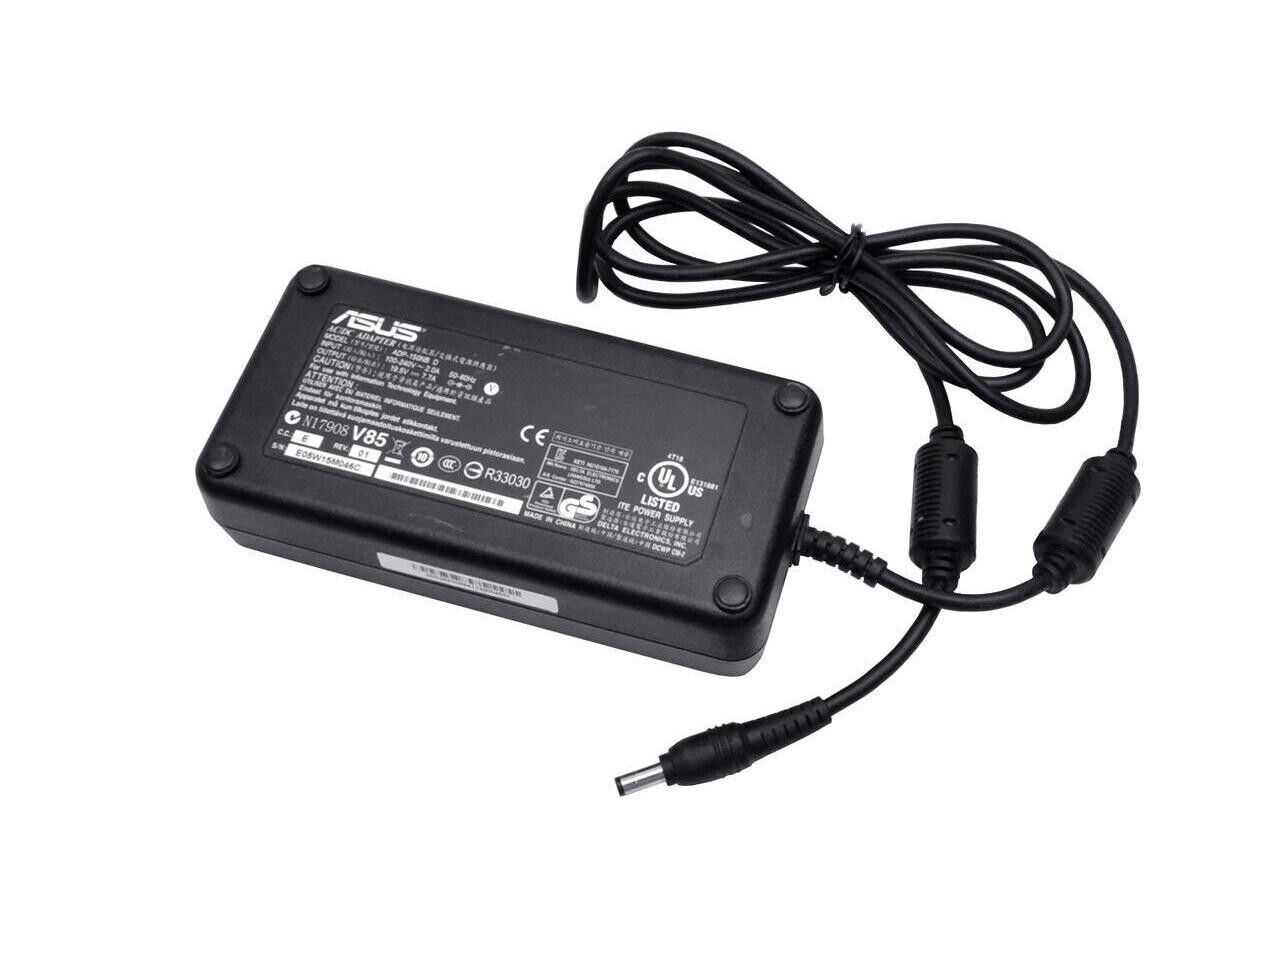 Asus ADP-150NB D 19.5V 150W AC Adapter for Asus G7 Series G53SW, G73JH, G53JW